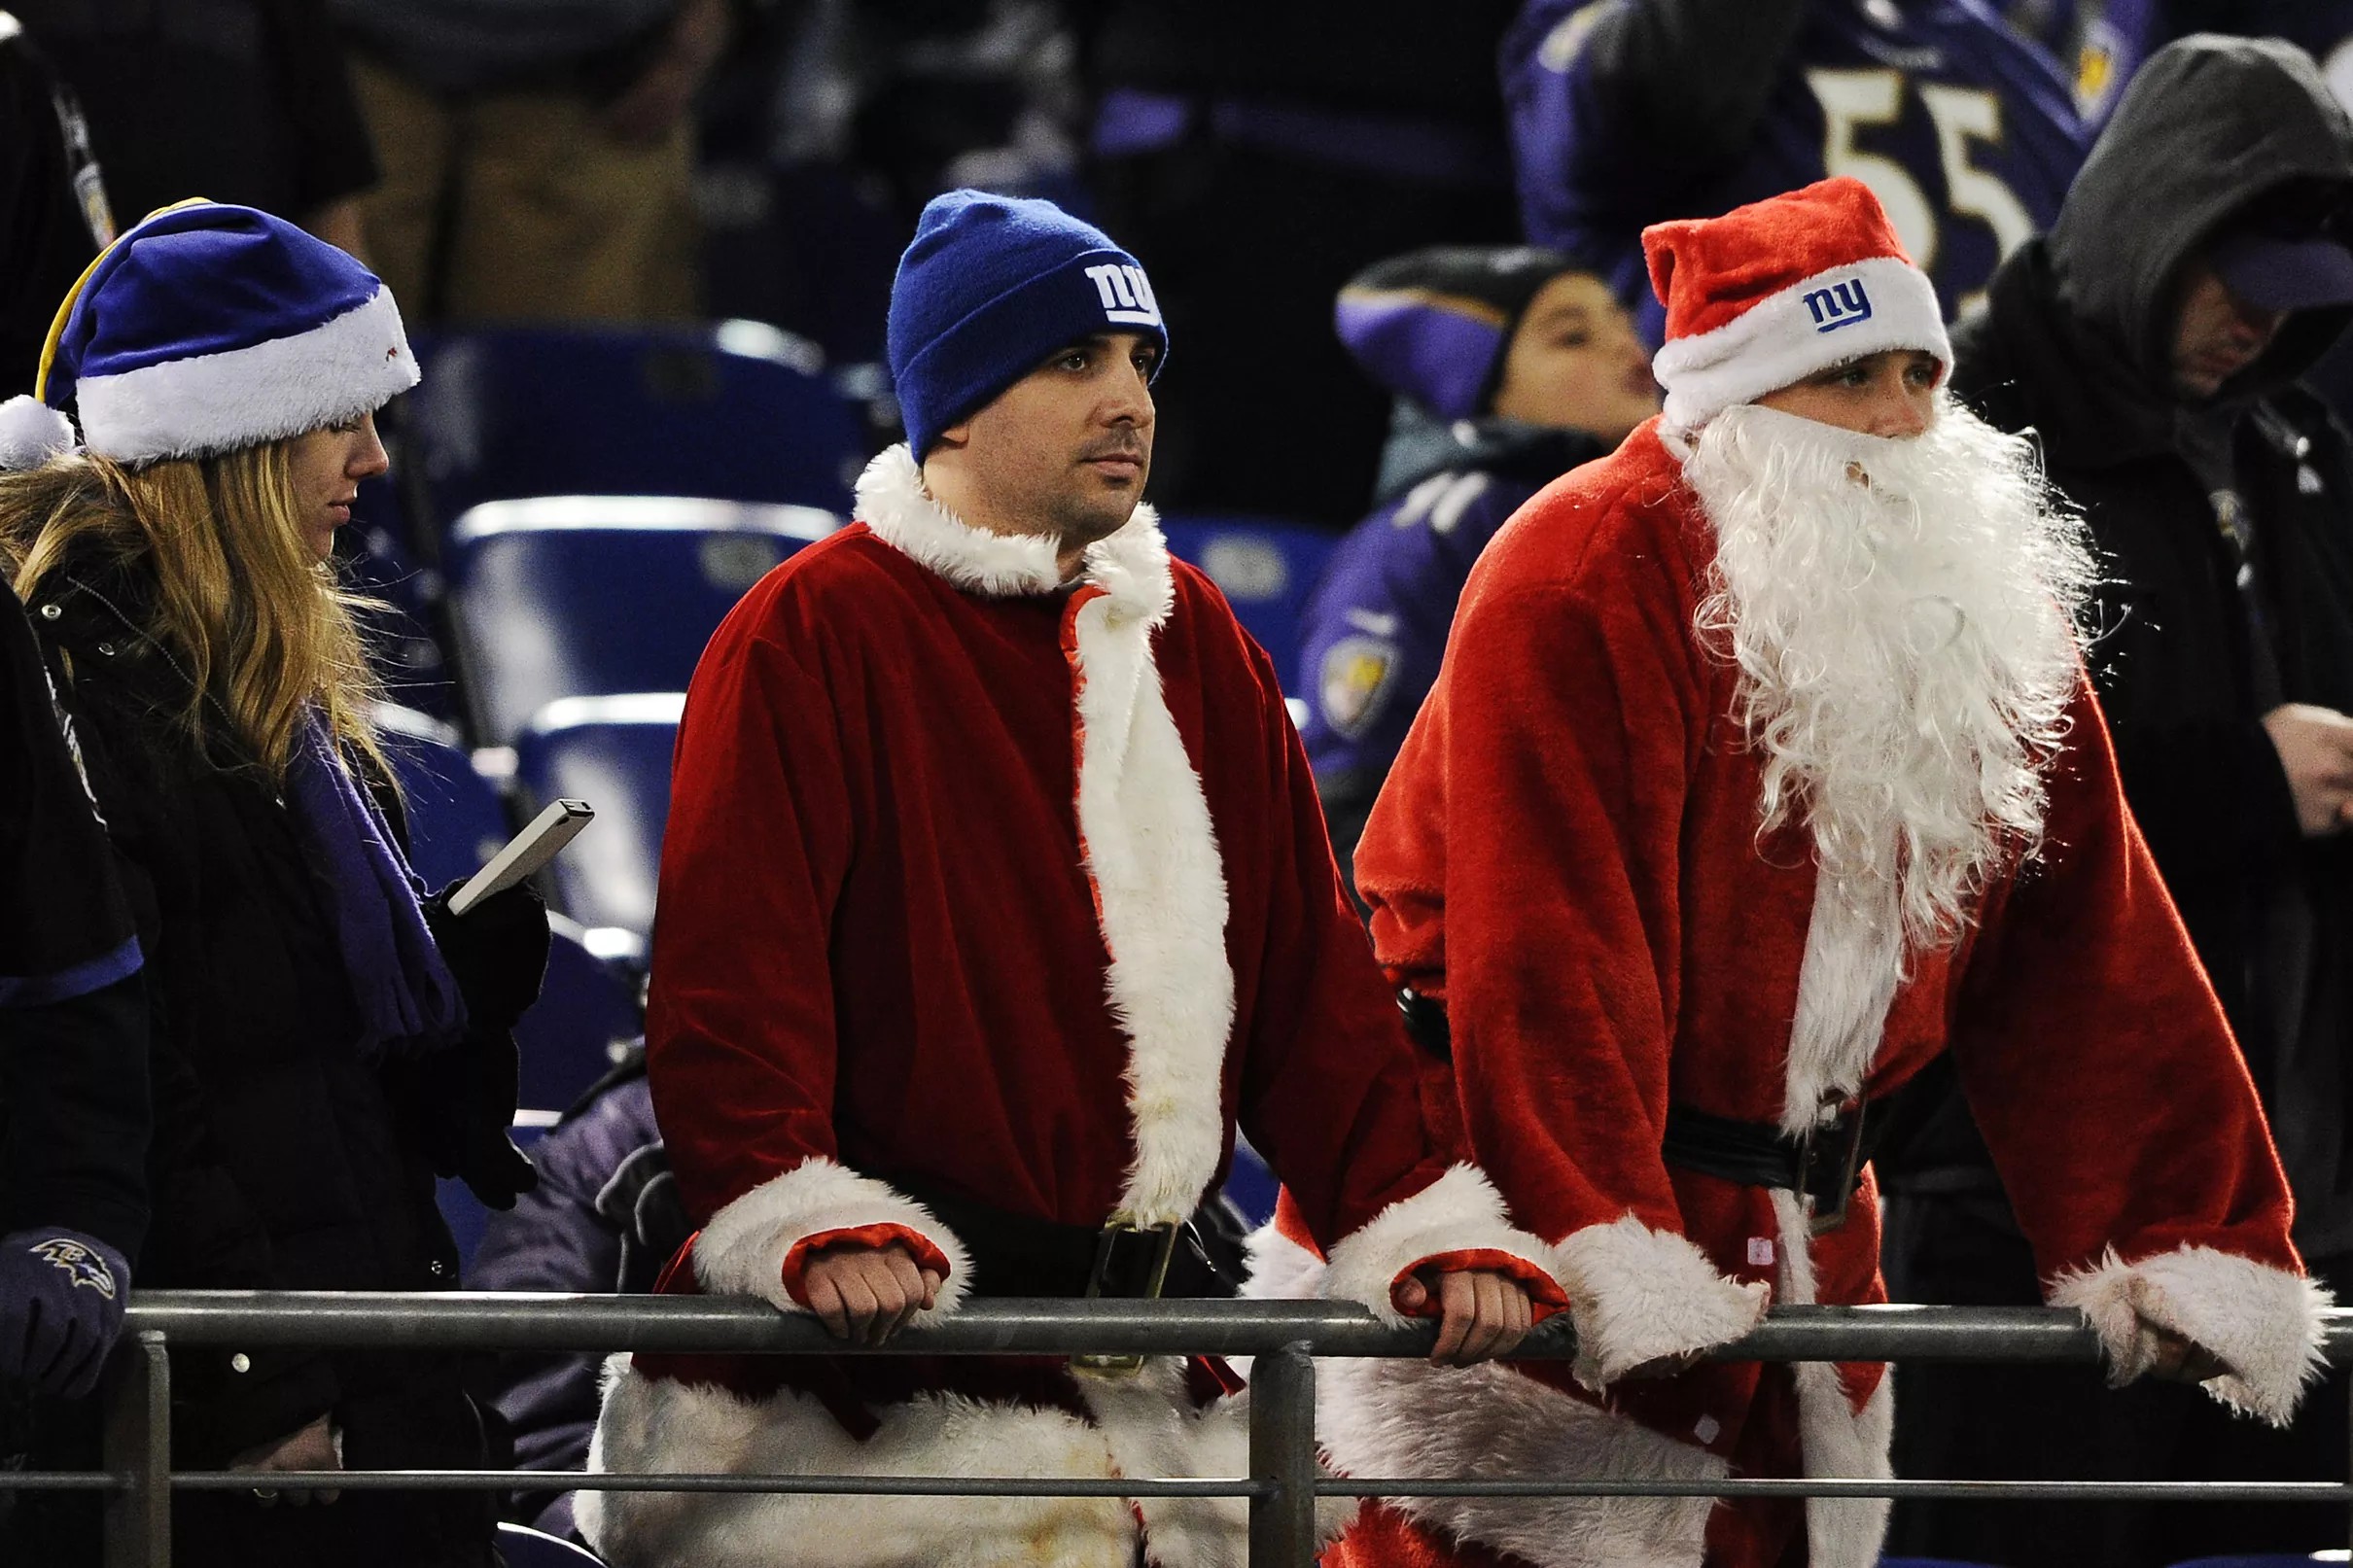 ‘Twas the night before a Giants Christmas